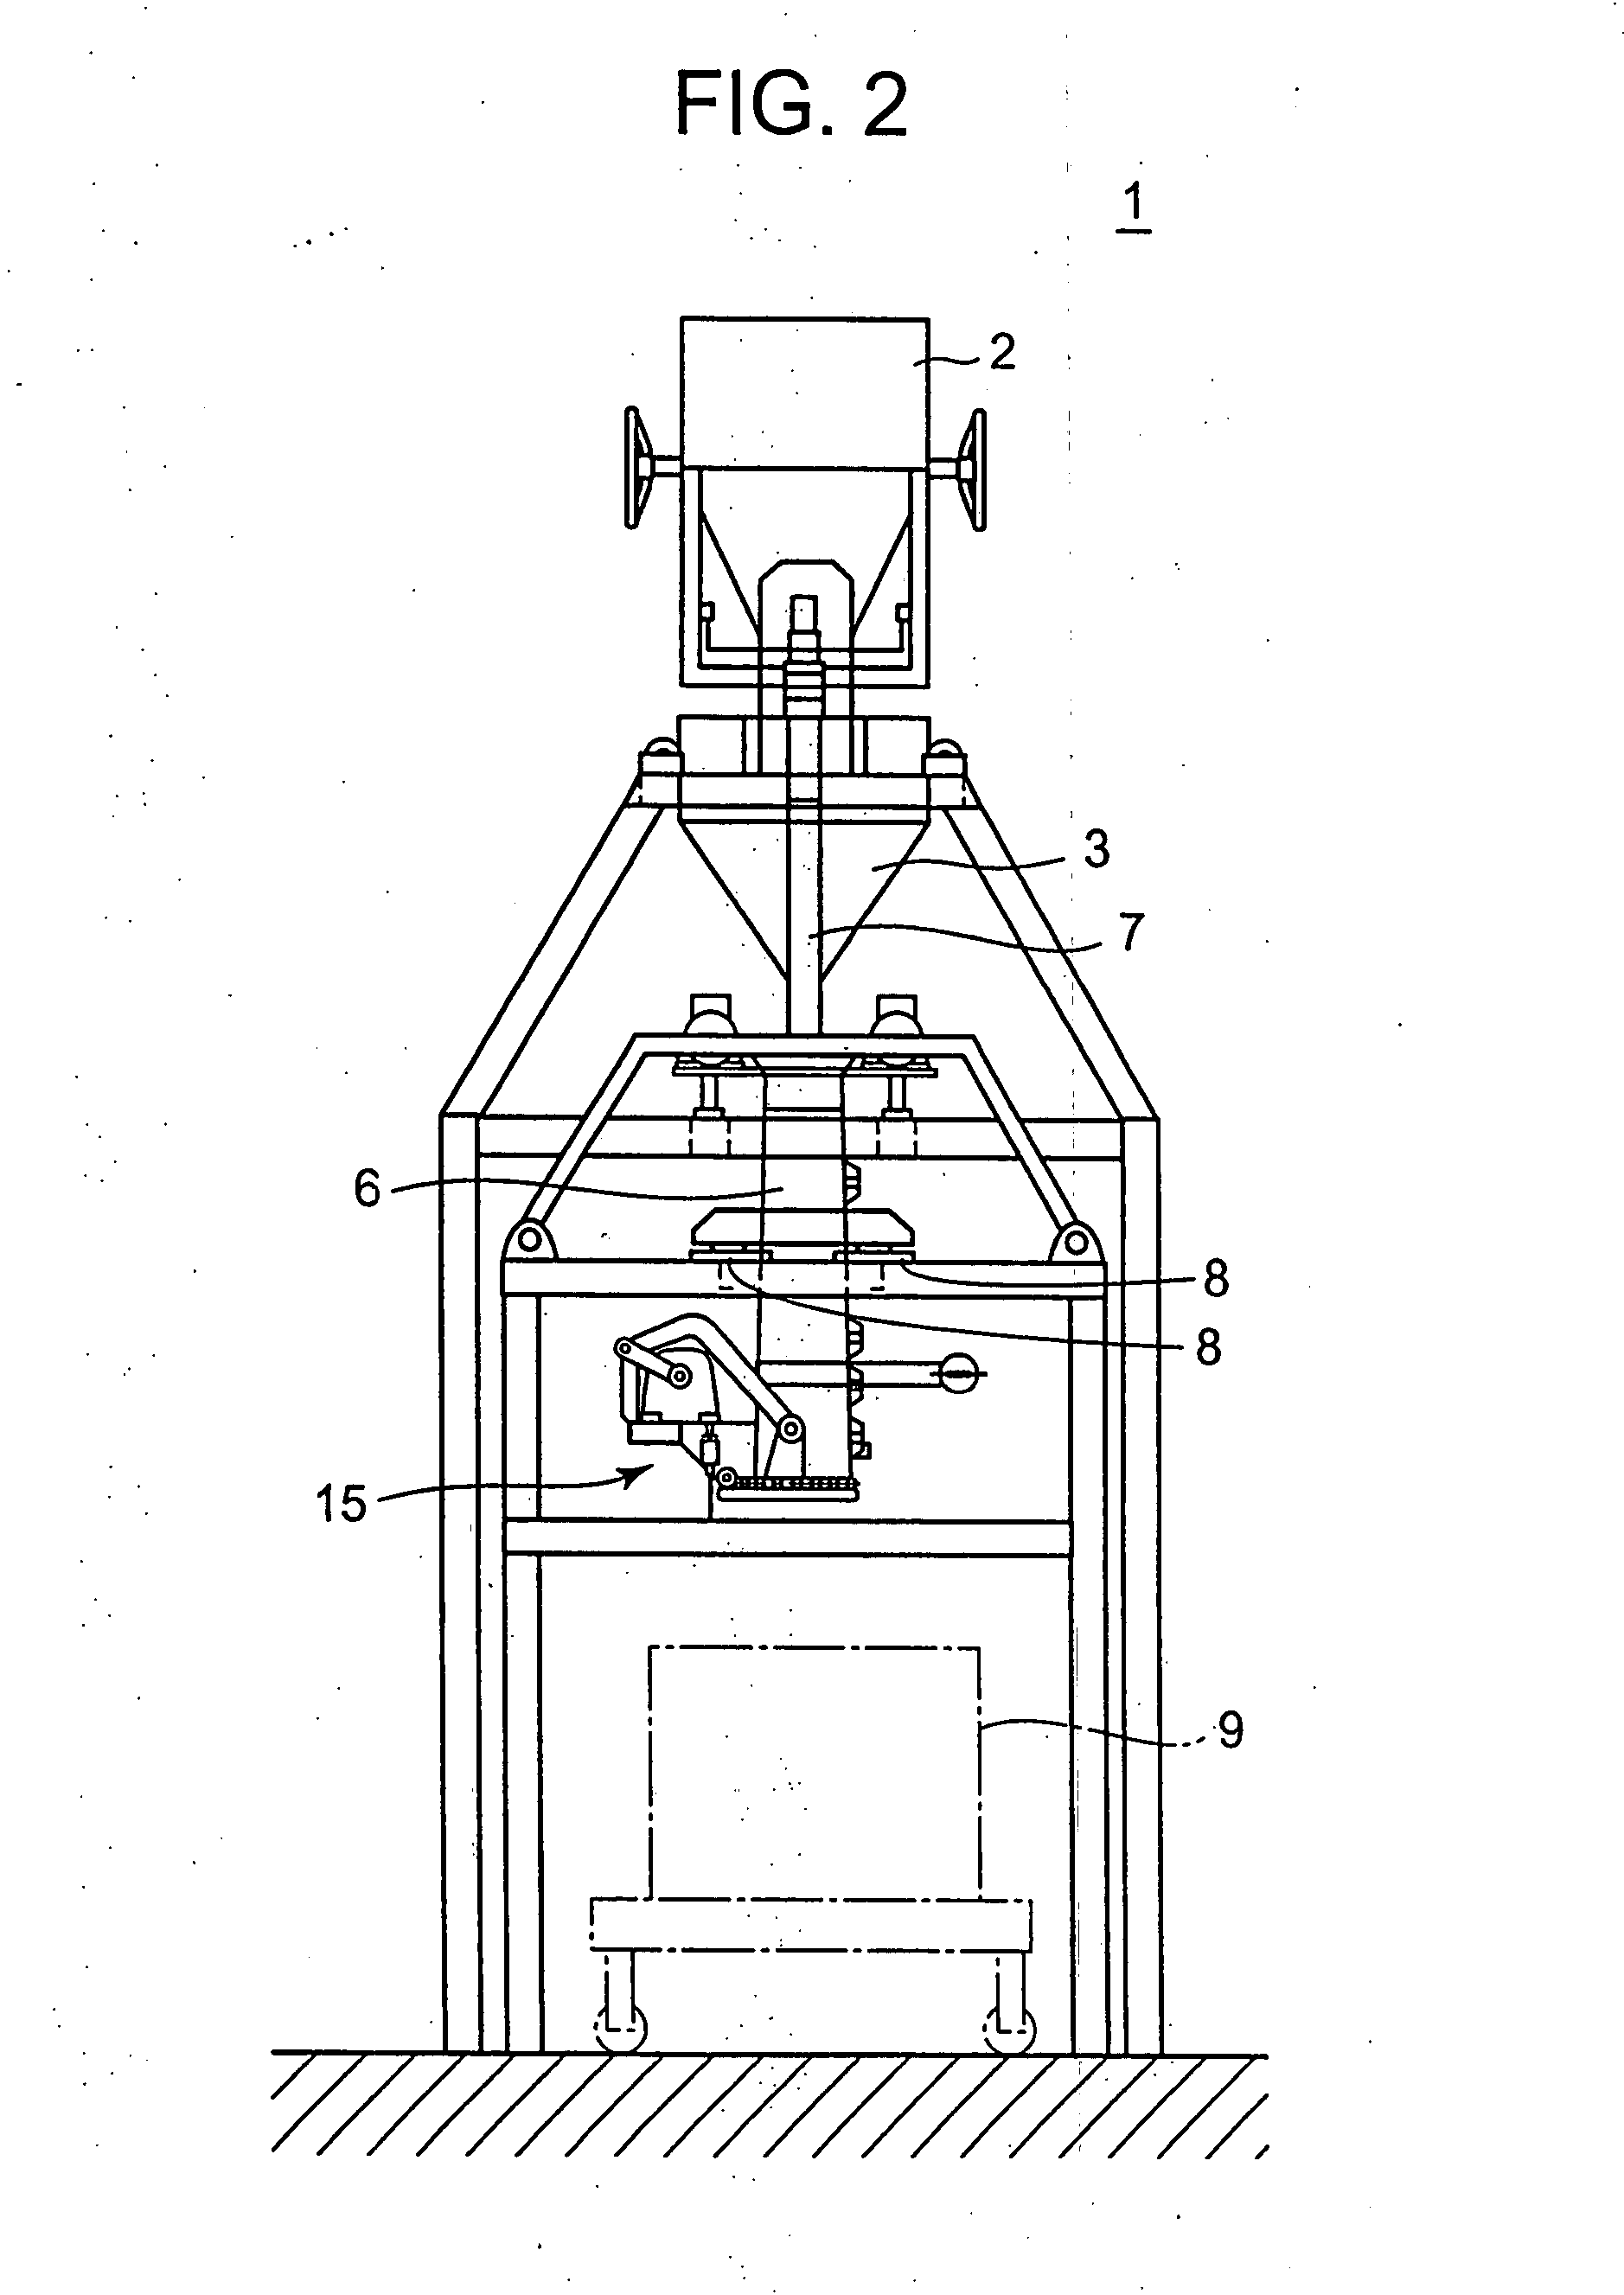 Measuring apparatus and measuring method for concrete-forming materials